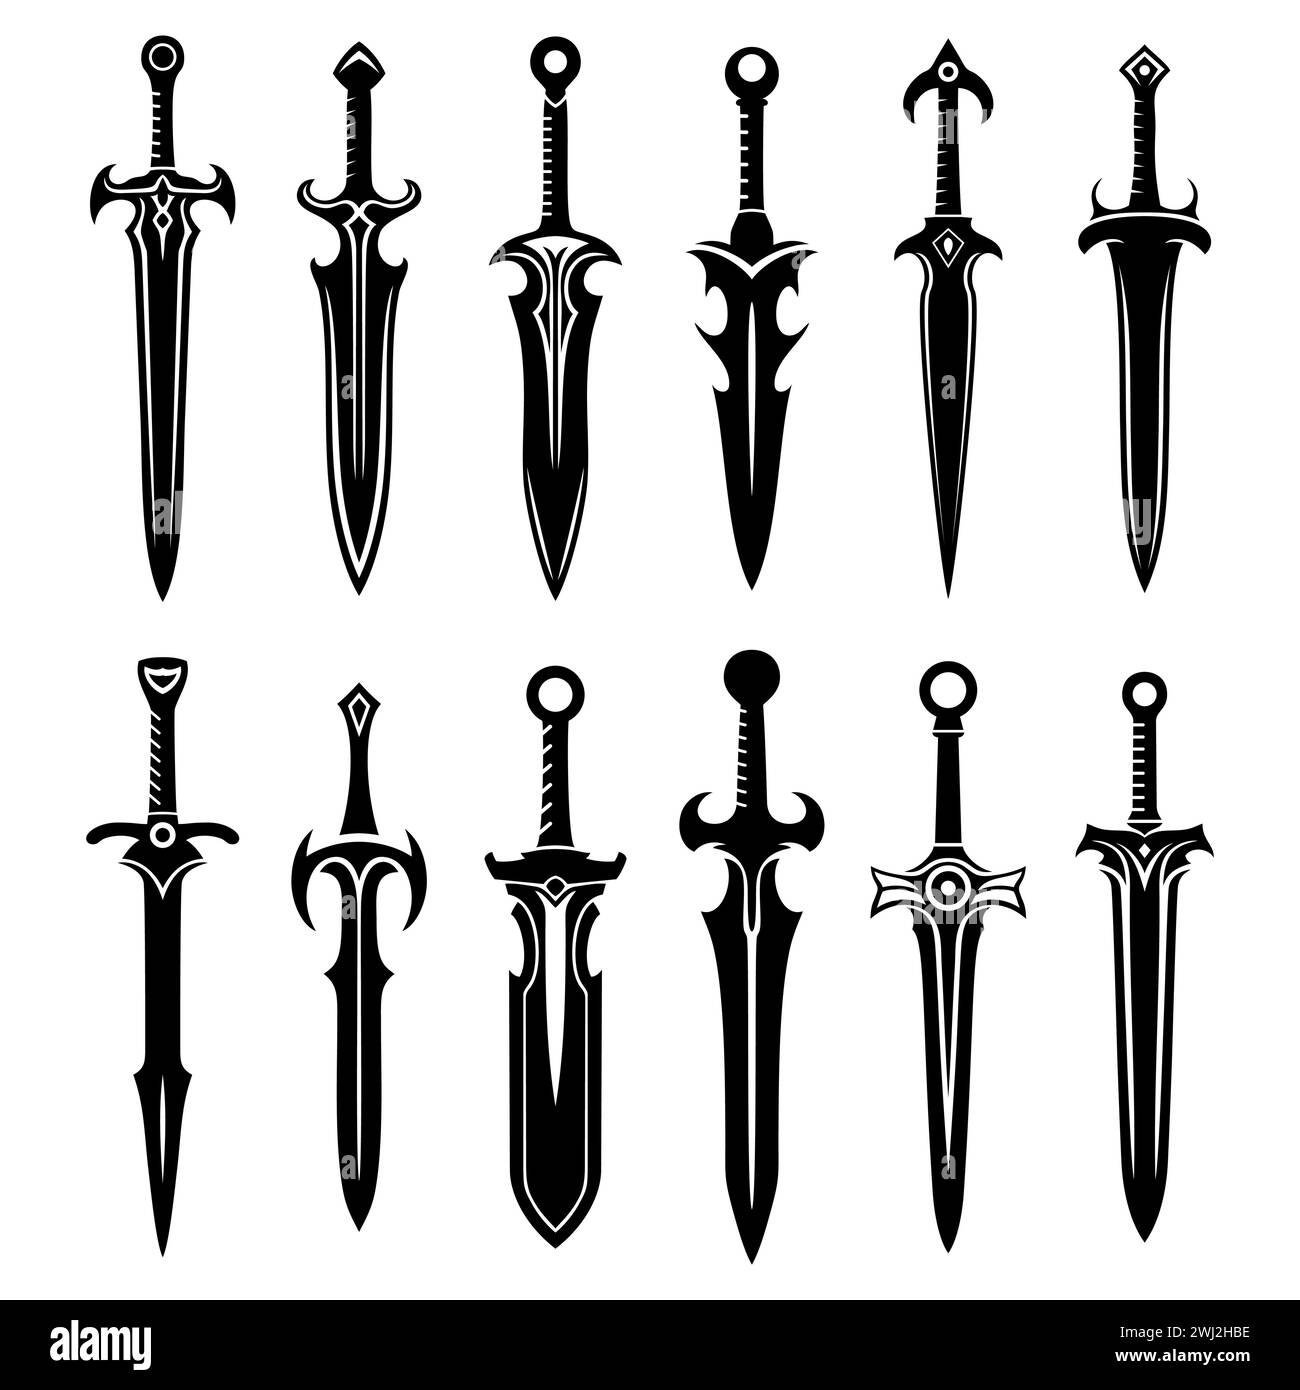 Set of fantasy swords icons. Medieval swords and futuristic weapons for game interface. Cartoon set of fantasy metal longswords. Vector illustration Stock Vector